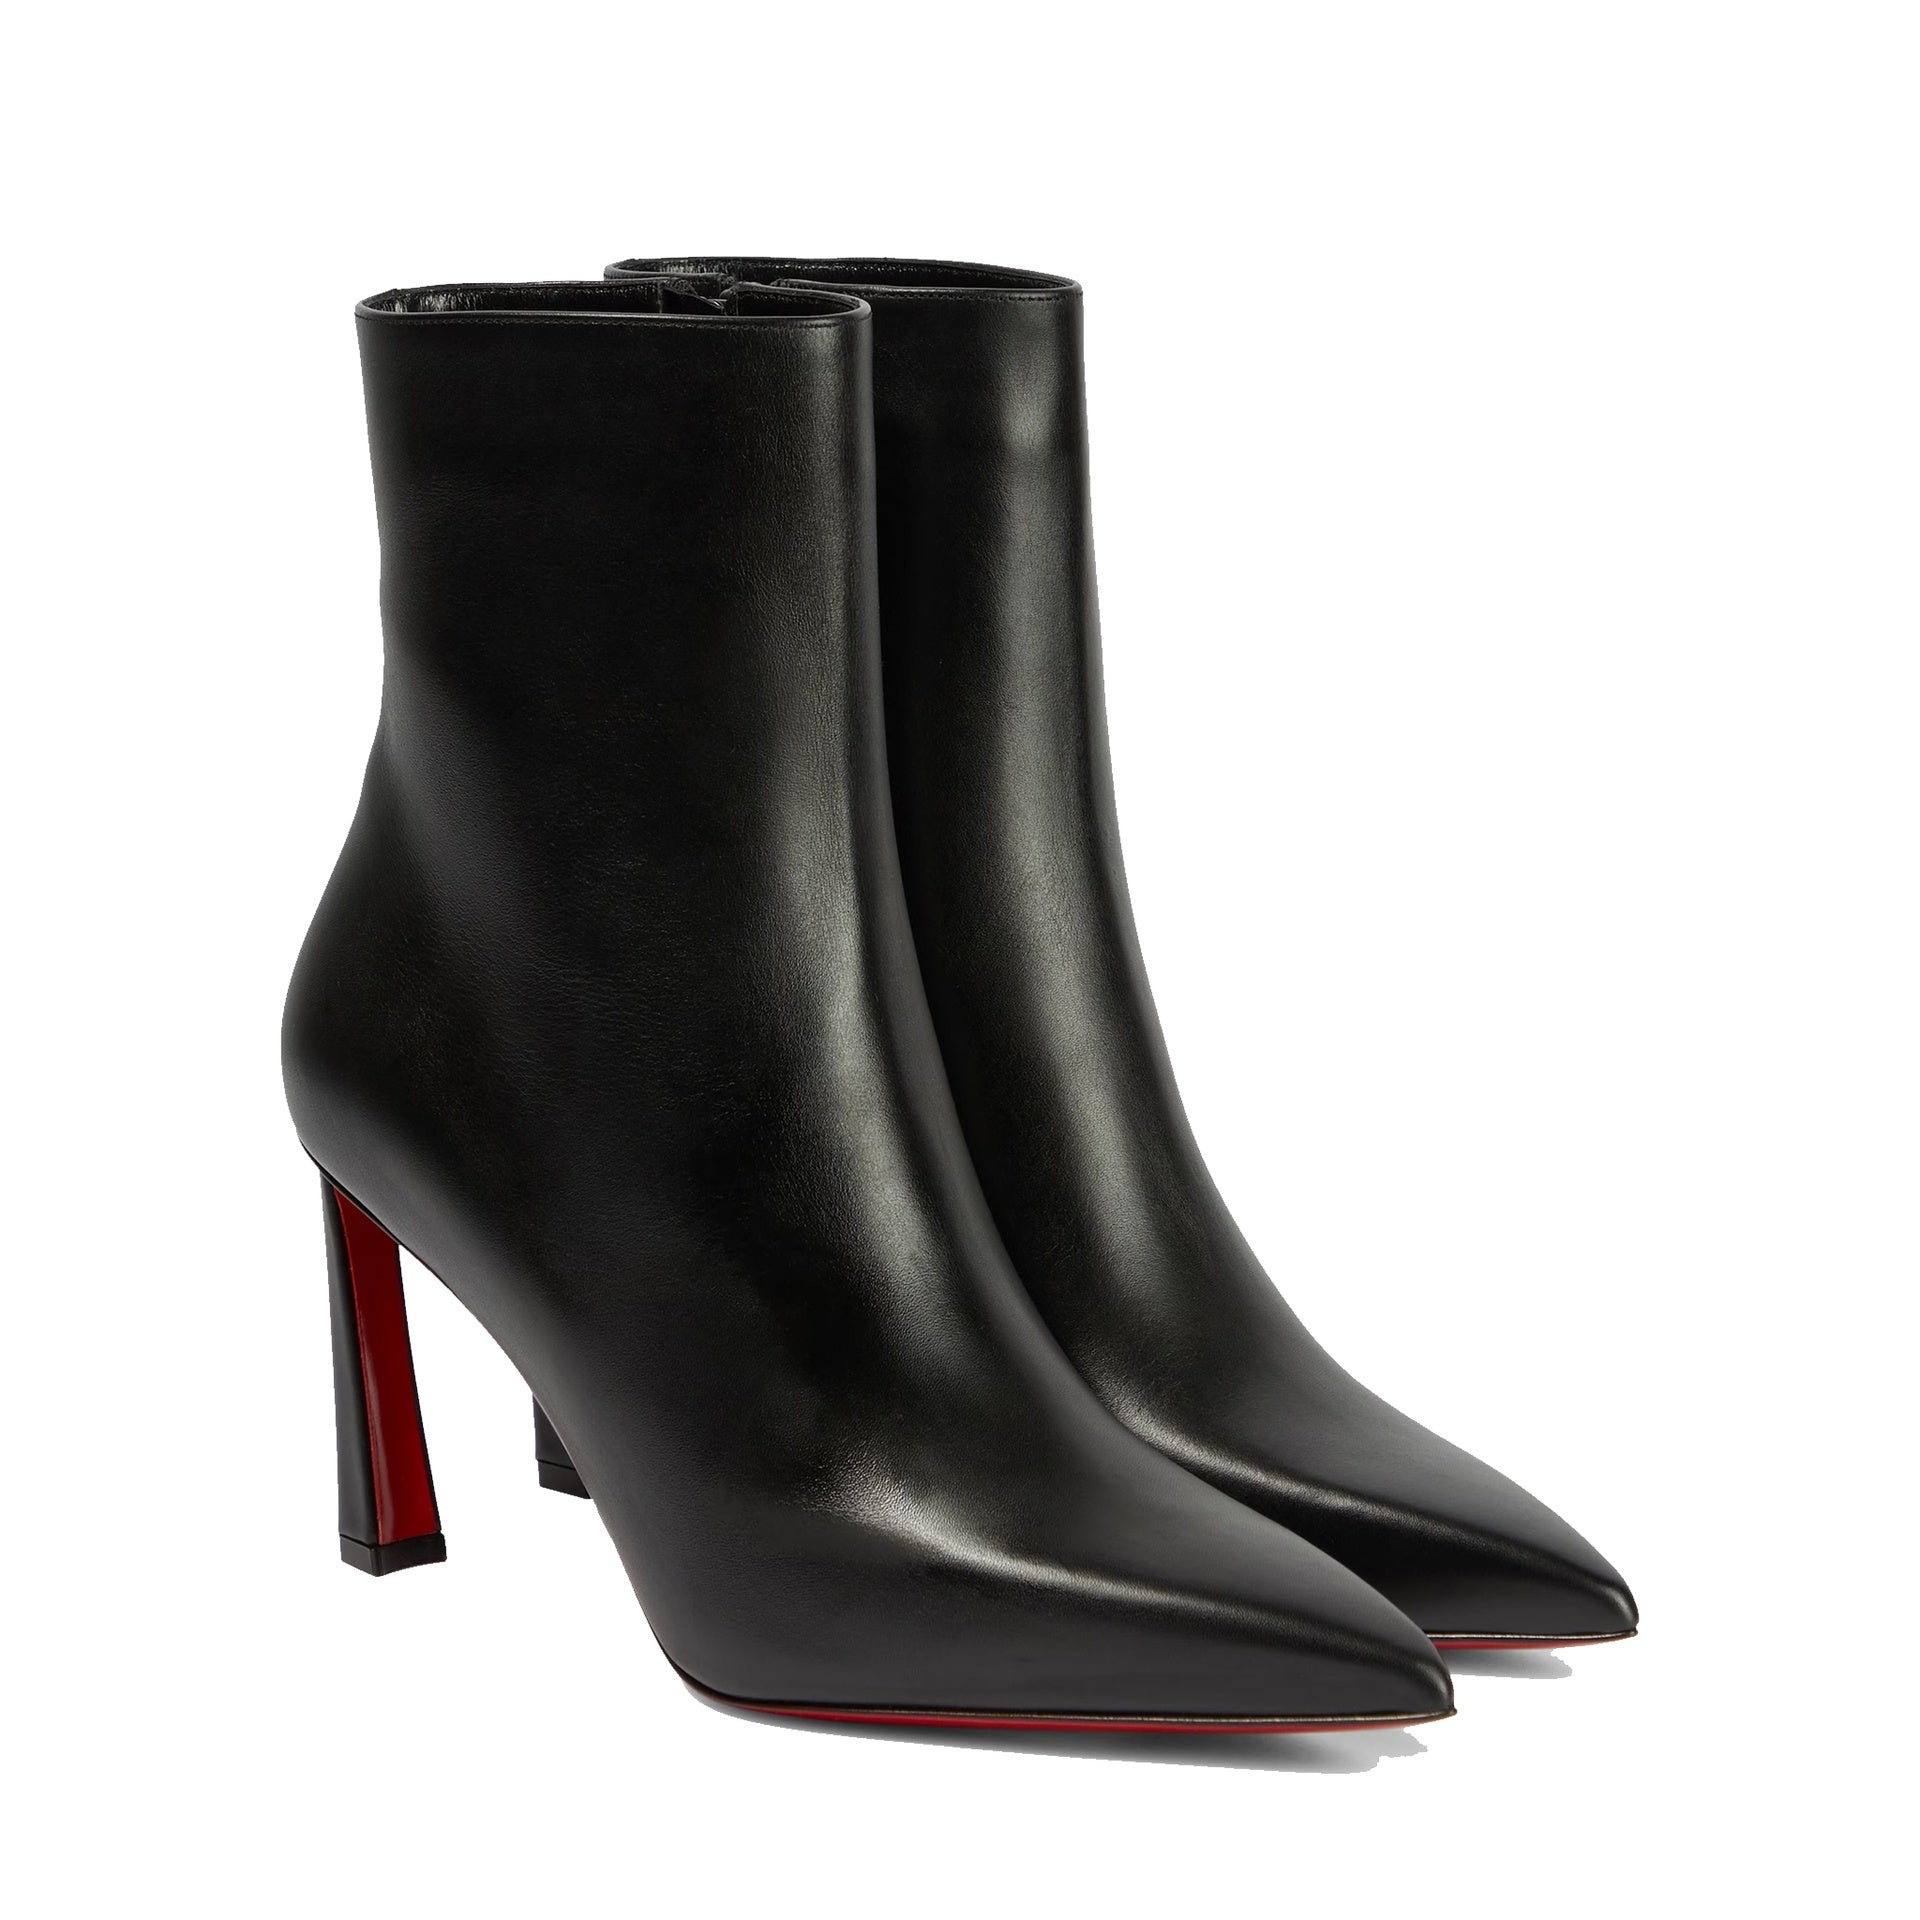 CHRISTIAN-LOUBOUTIN-OUTLET-SALE-Christian-Louboutin-Cora-85-Boots-Stiefel-Stiefeletten-BLACK-36_5-ARCHIVE-COLLECTION-2.jpg